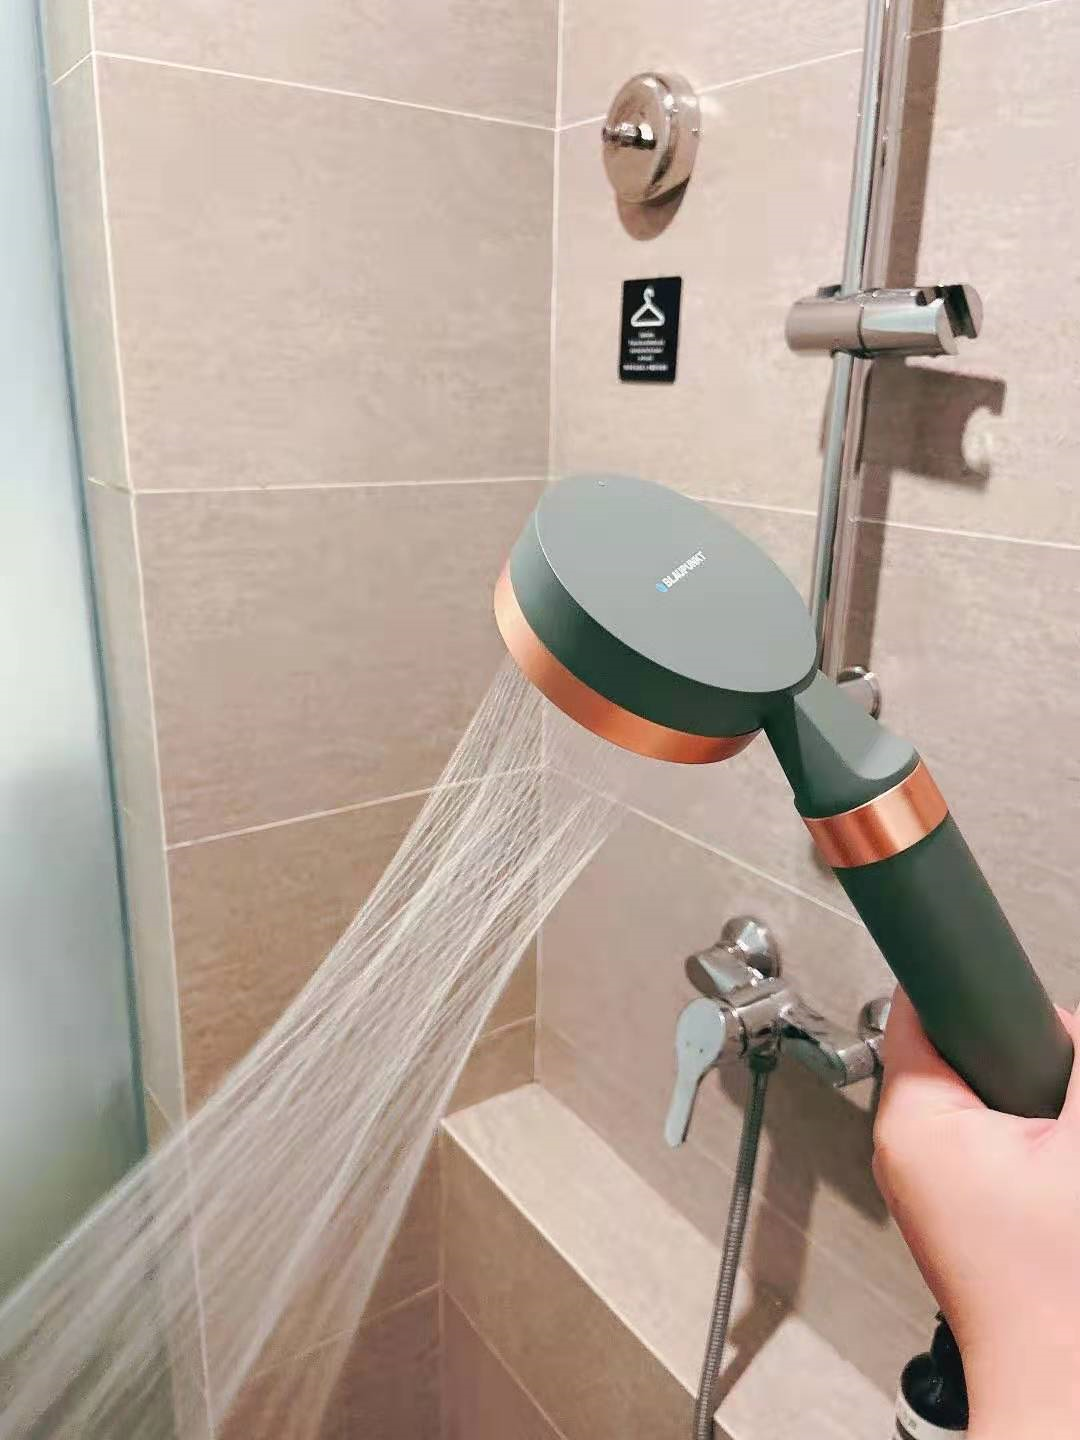 The bathroom beauty care shower head, let the dry hair problem disappear!